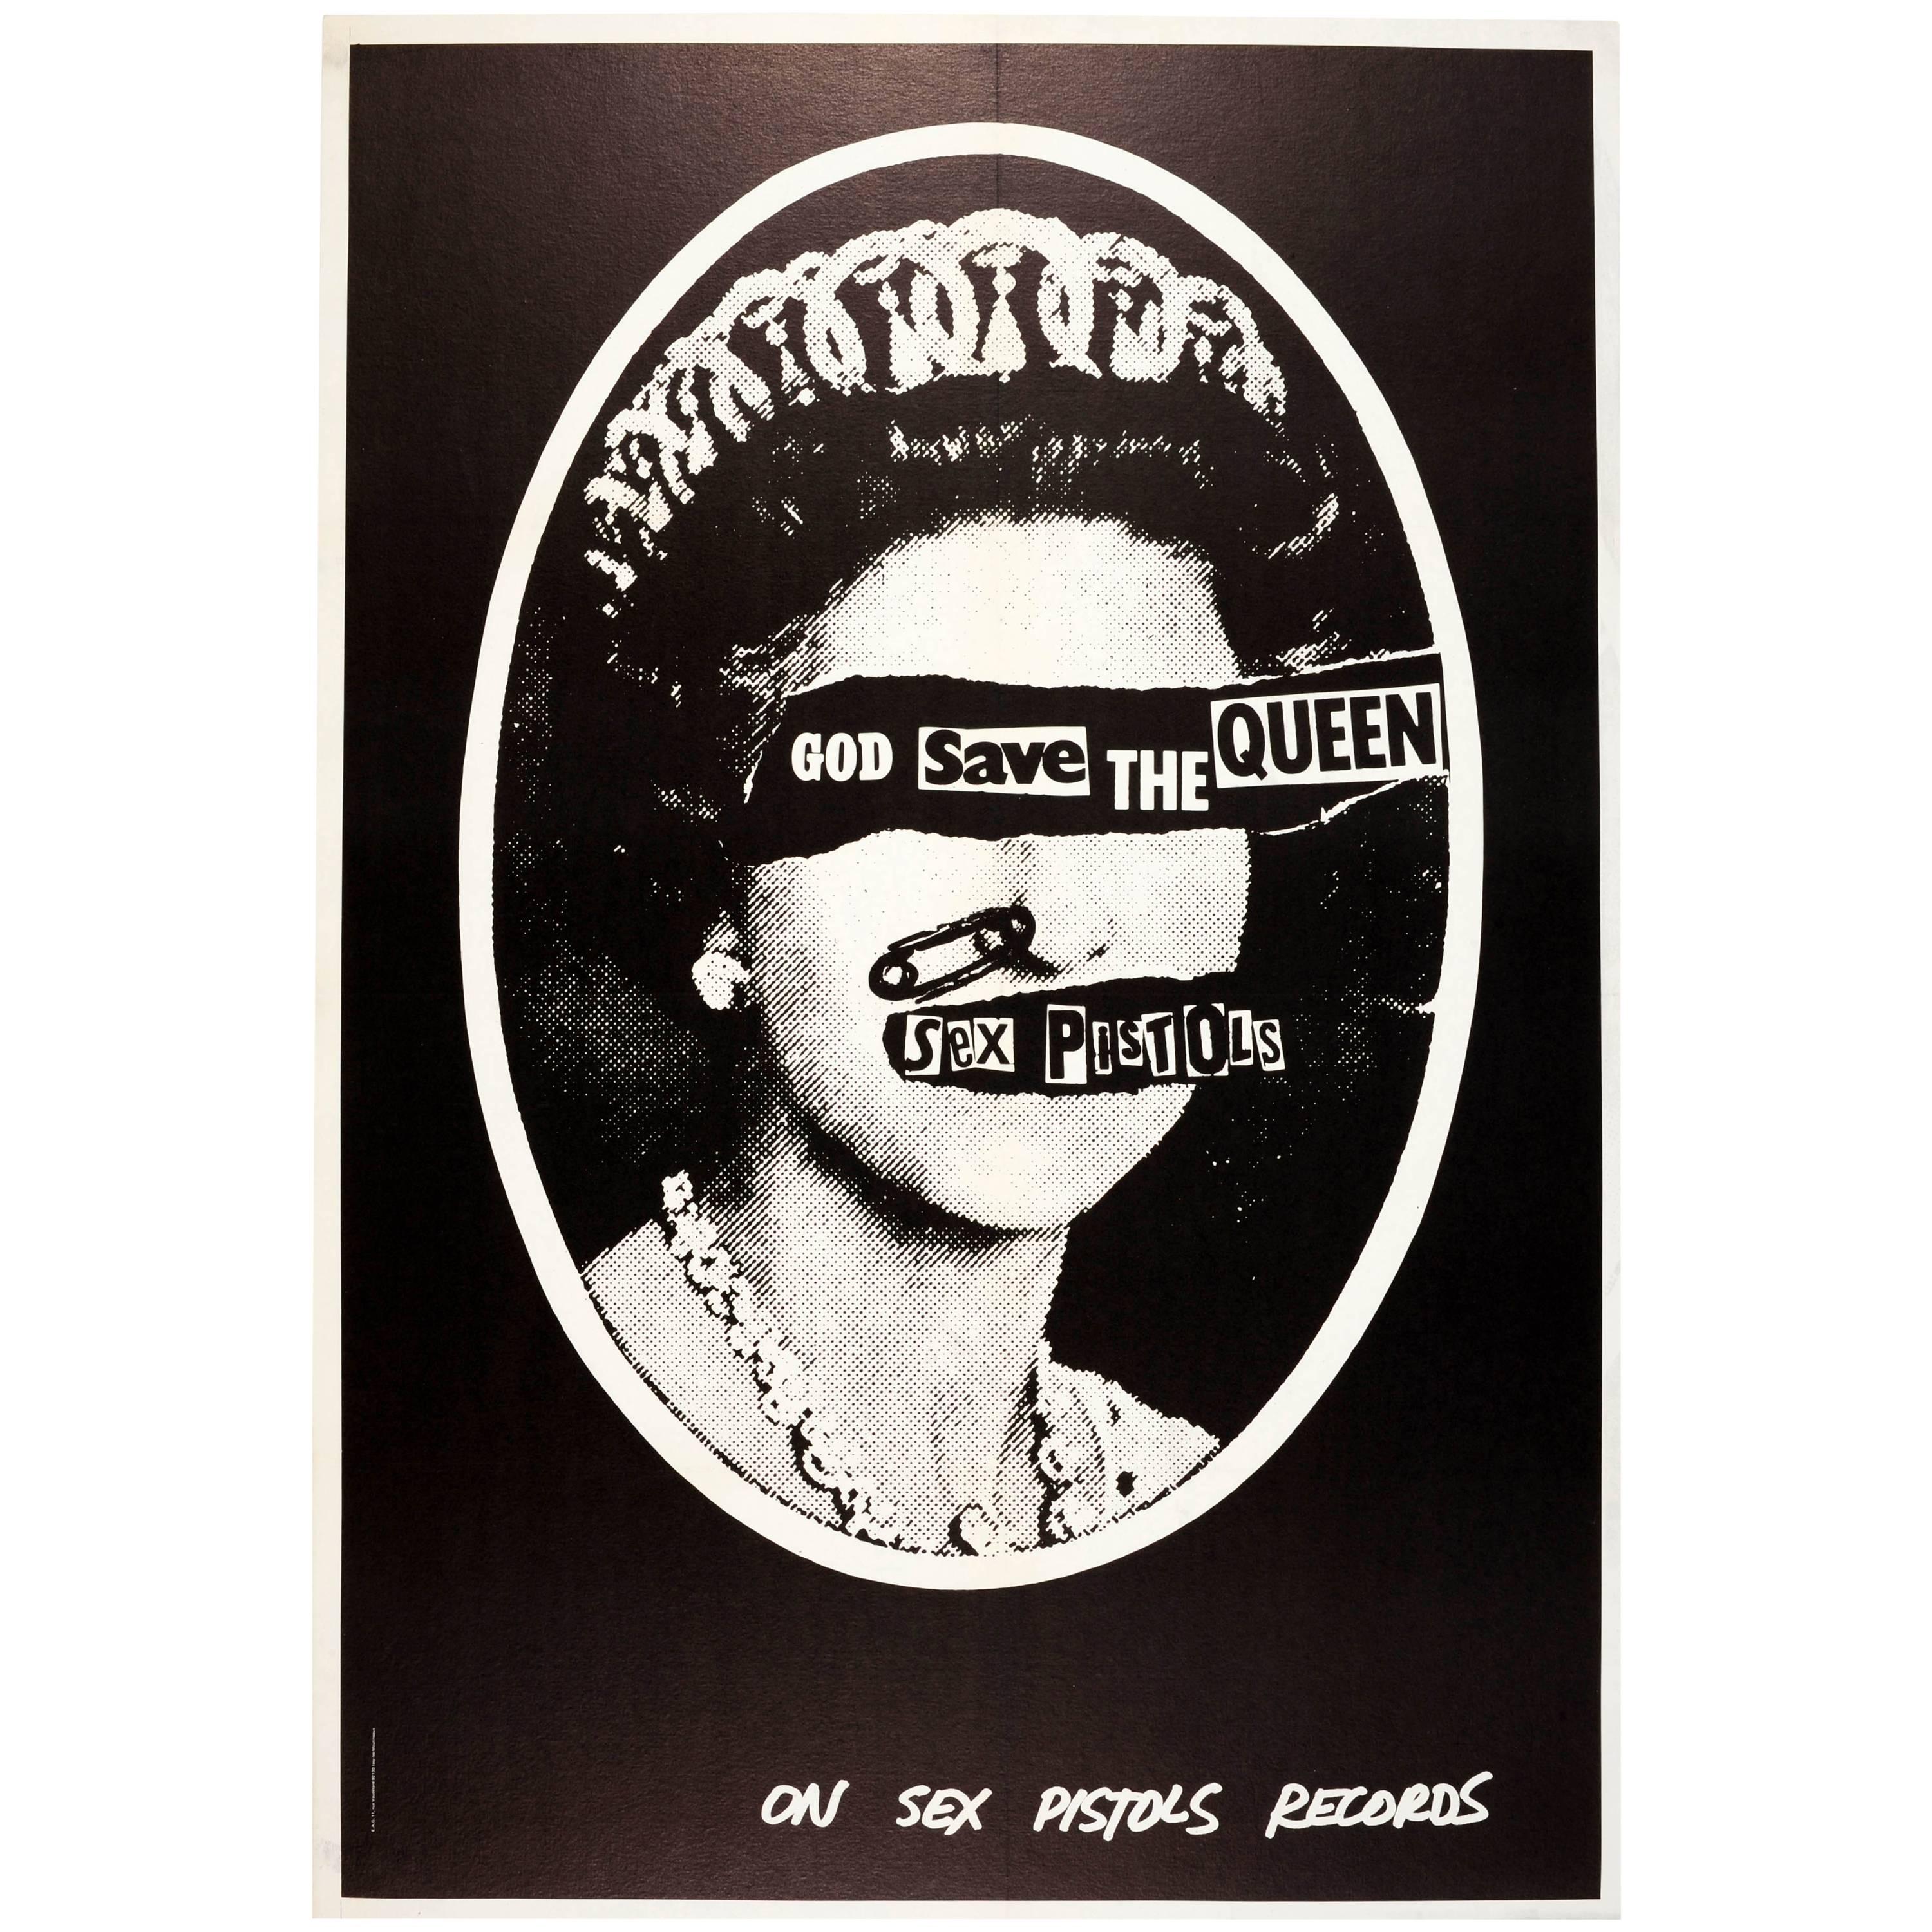 Original Iconic Punk Rock Music Poster For The Sex Pistols - God Save The Queen